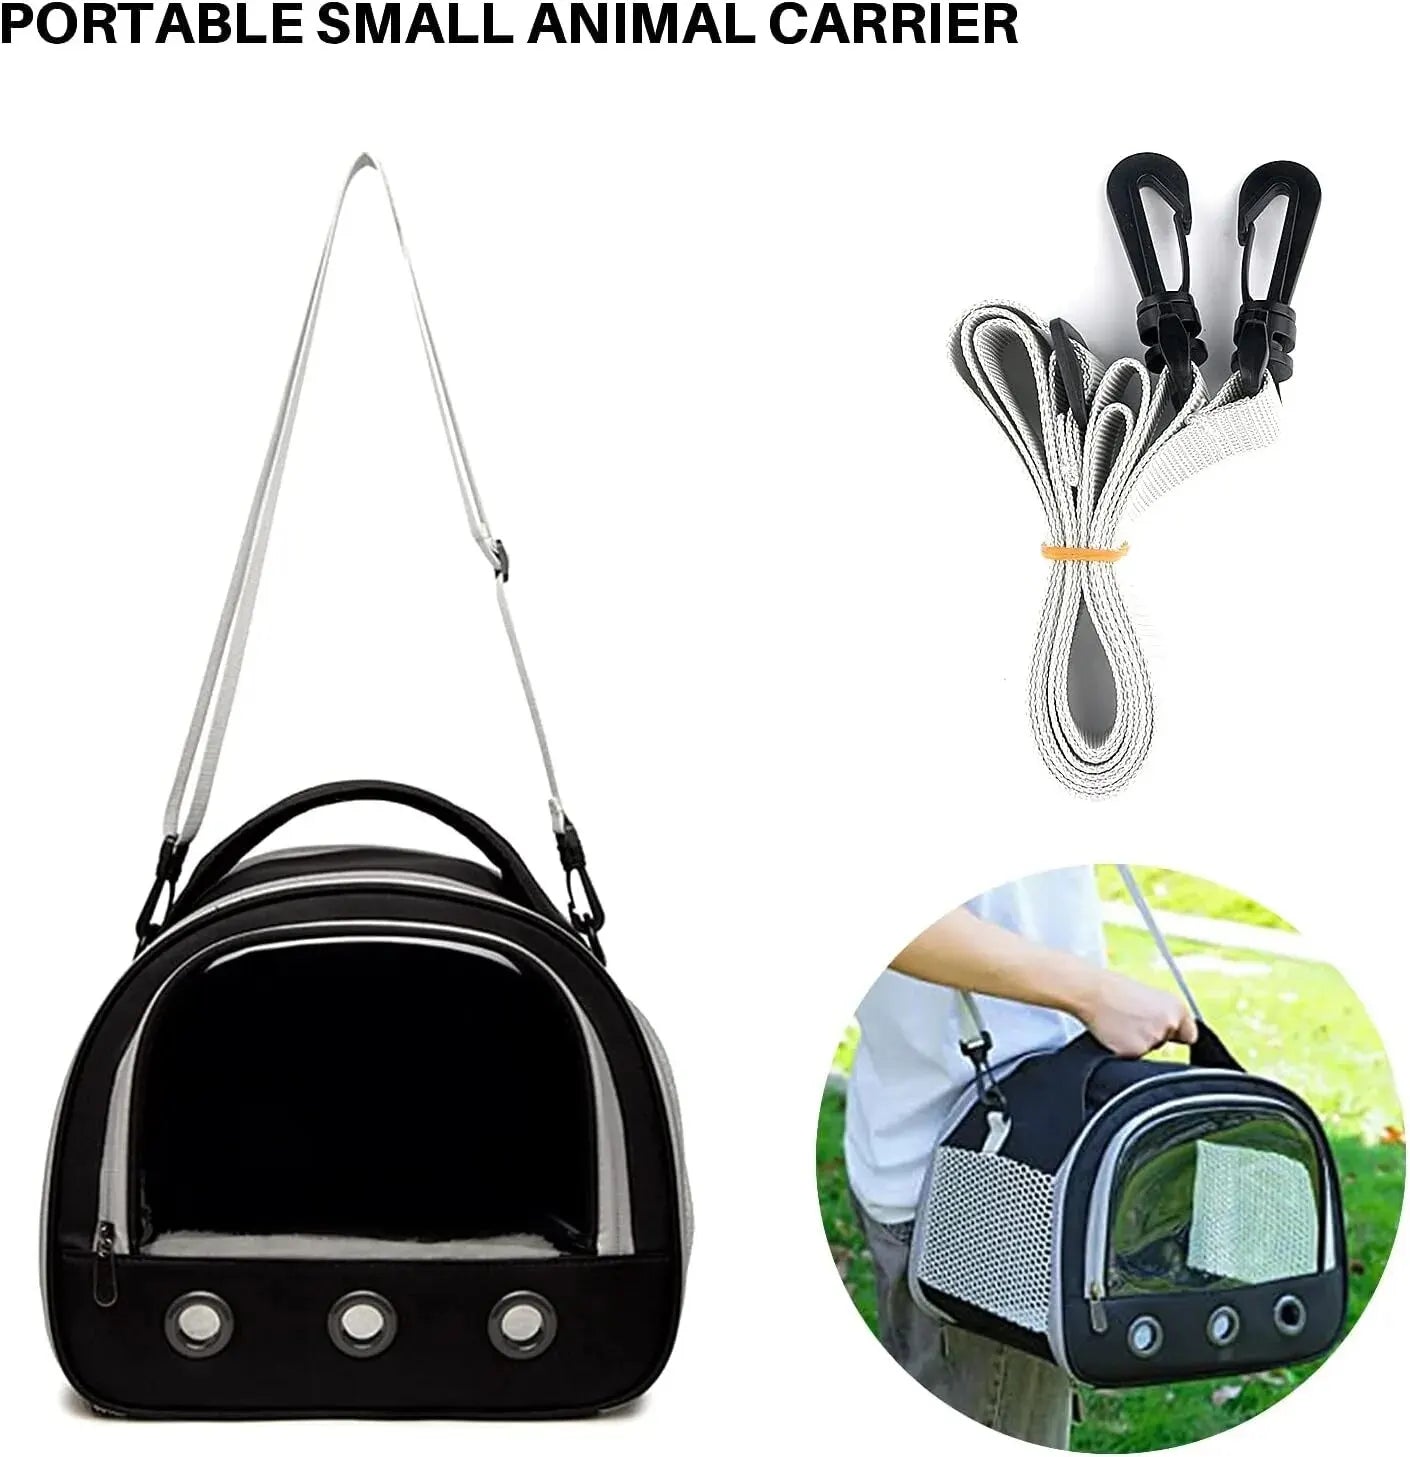 Portable Small Animal Carrier Bag Guinea Pig Carrier Cage Pet Carrier for Cat Hamster Hedgehog Parrots Rat and Other Small Animals